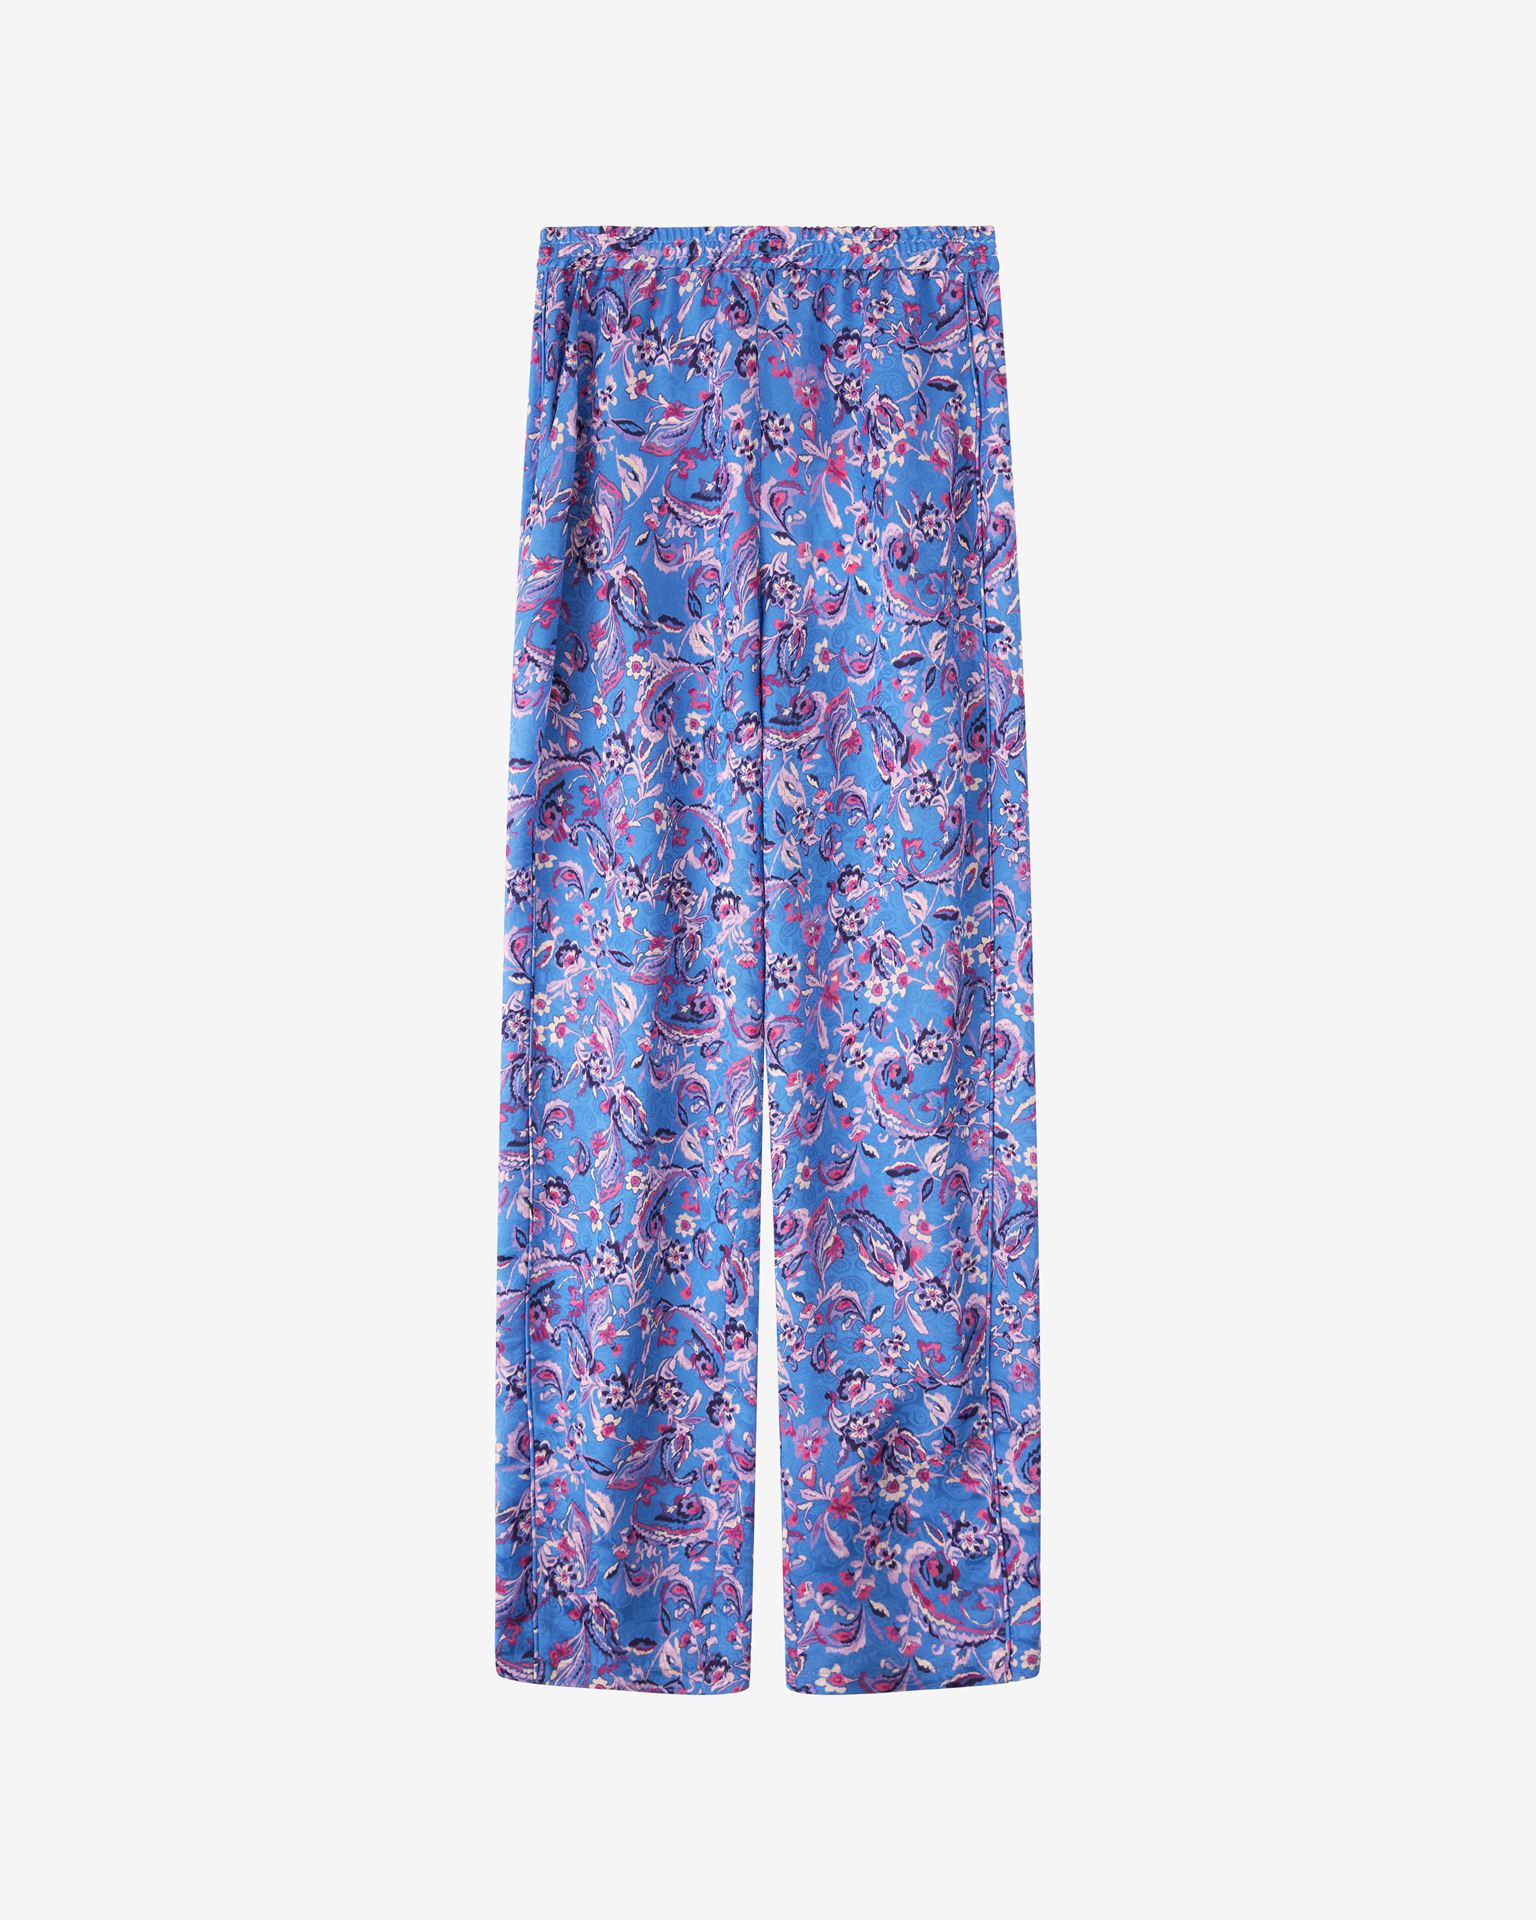 ISABEL MARANT PIERA PRINTED TROUSERS,30032834RD